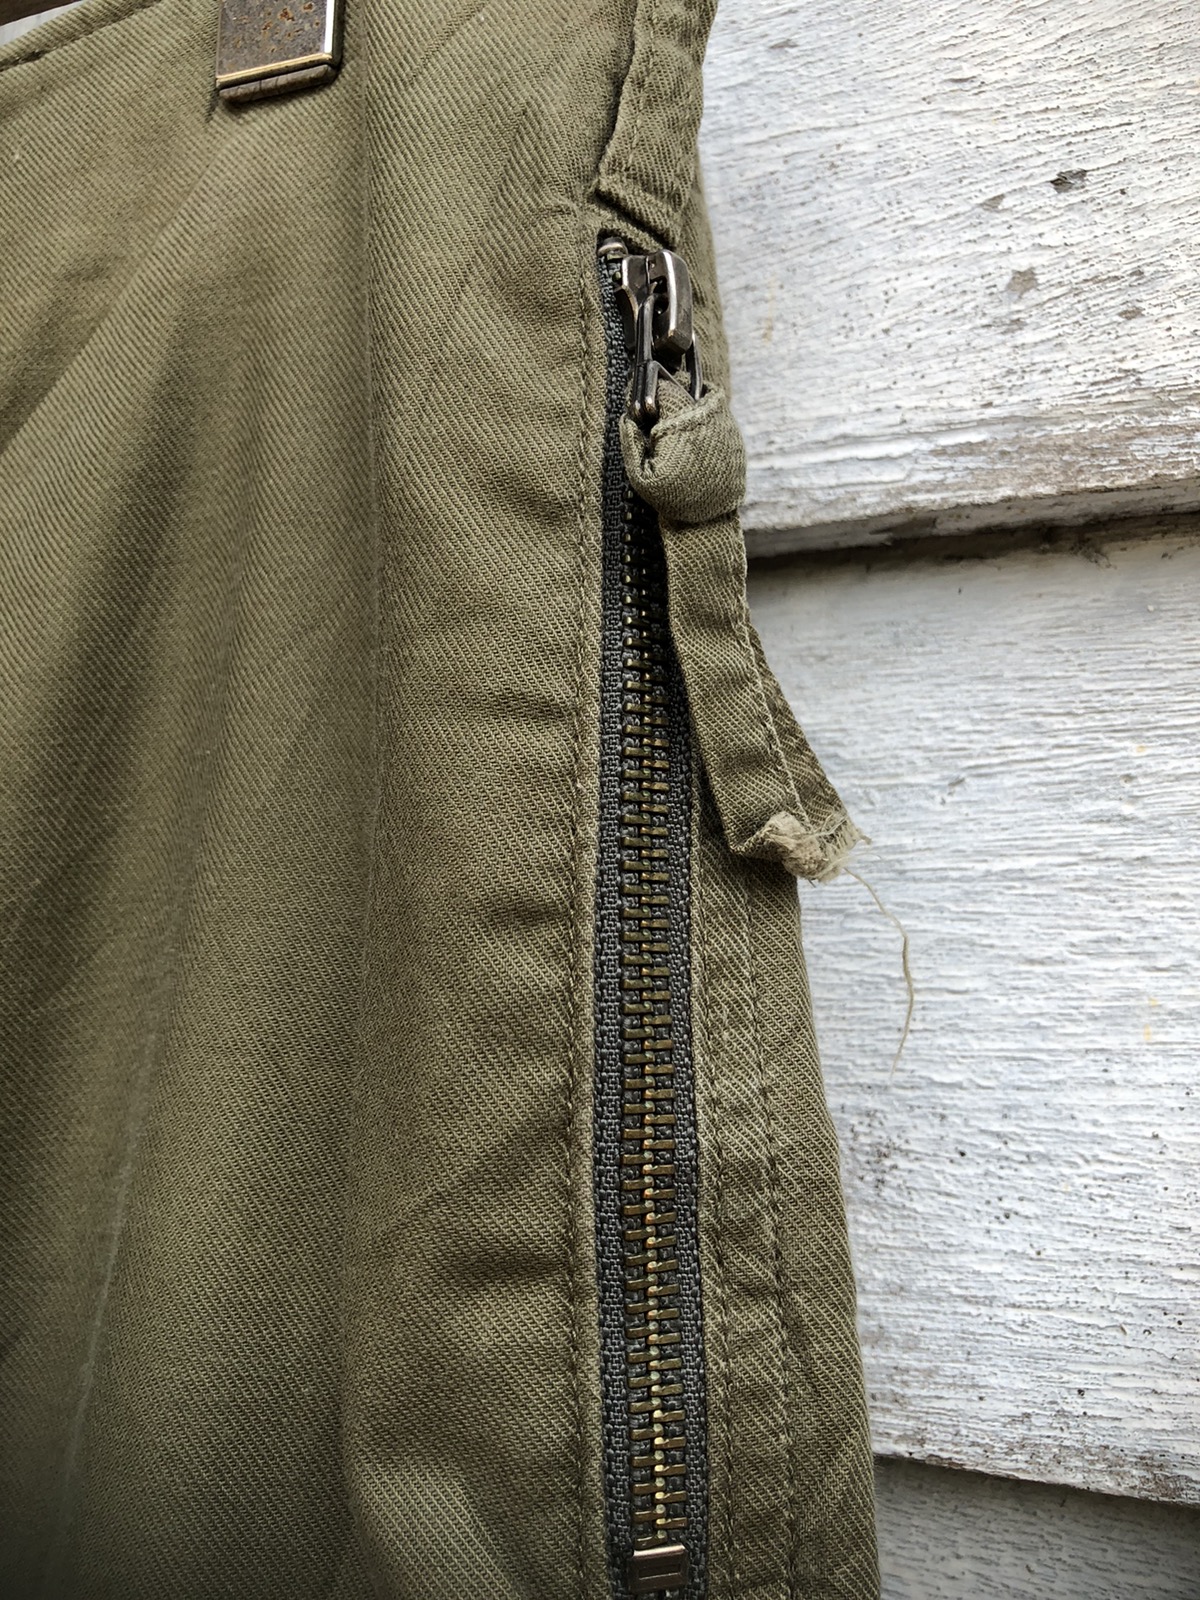 N. Hollywood Military Issues Trouser - 7